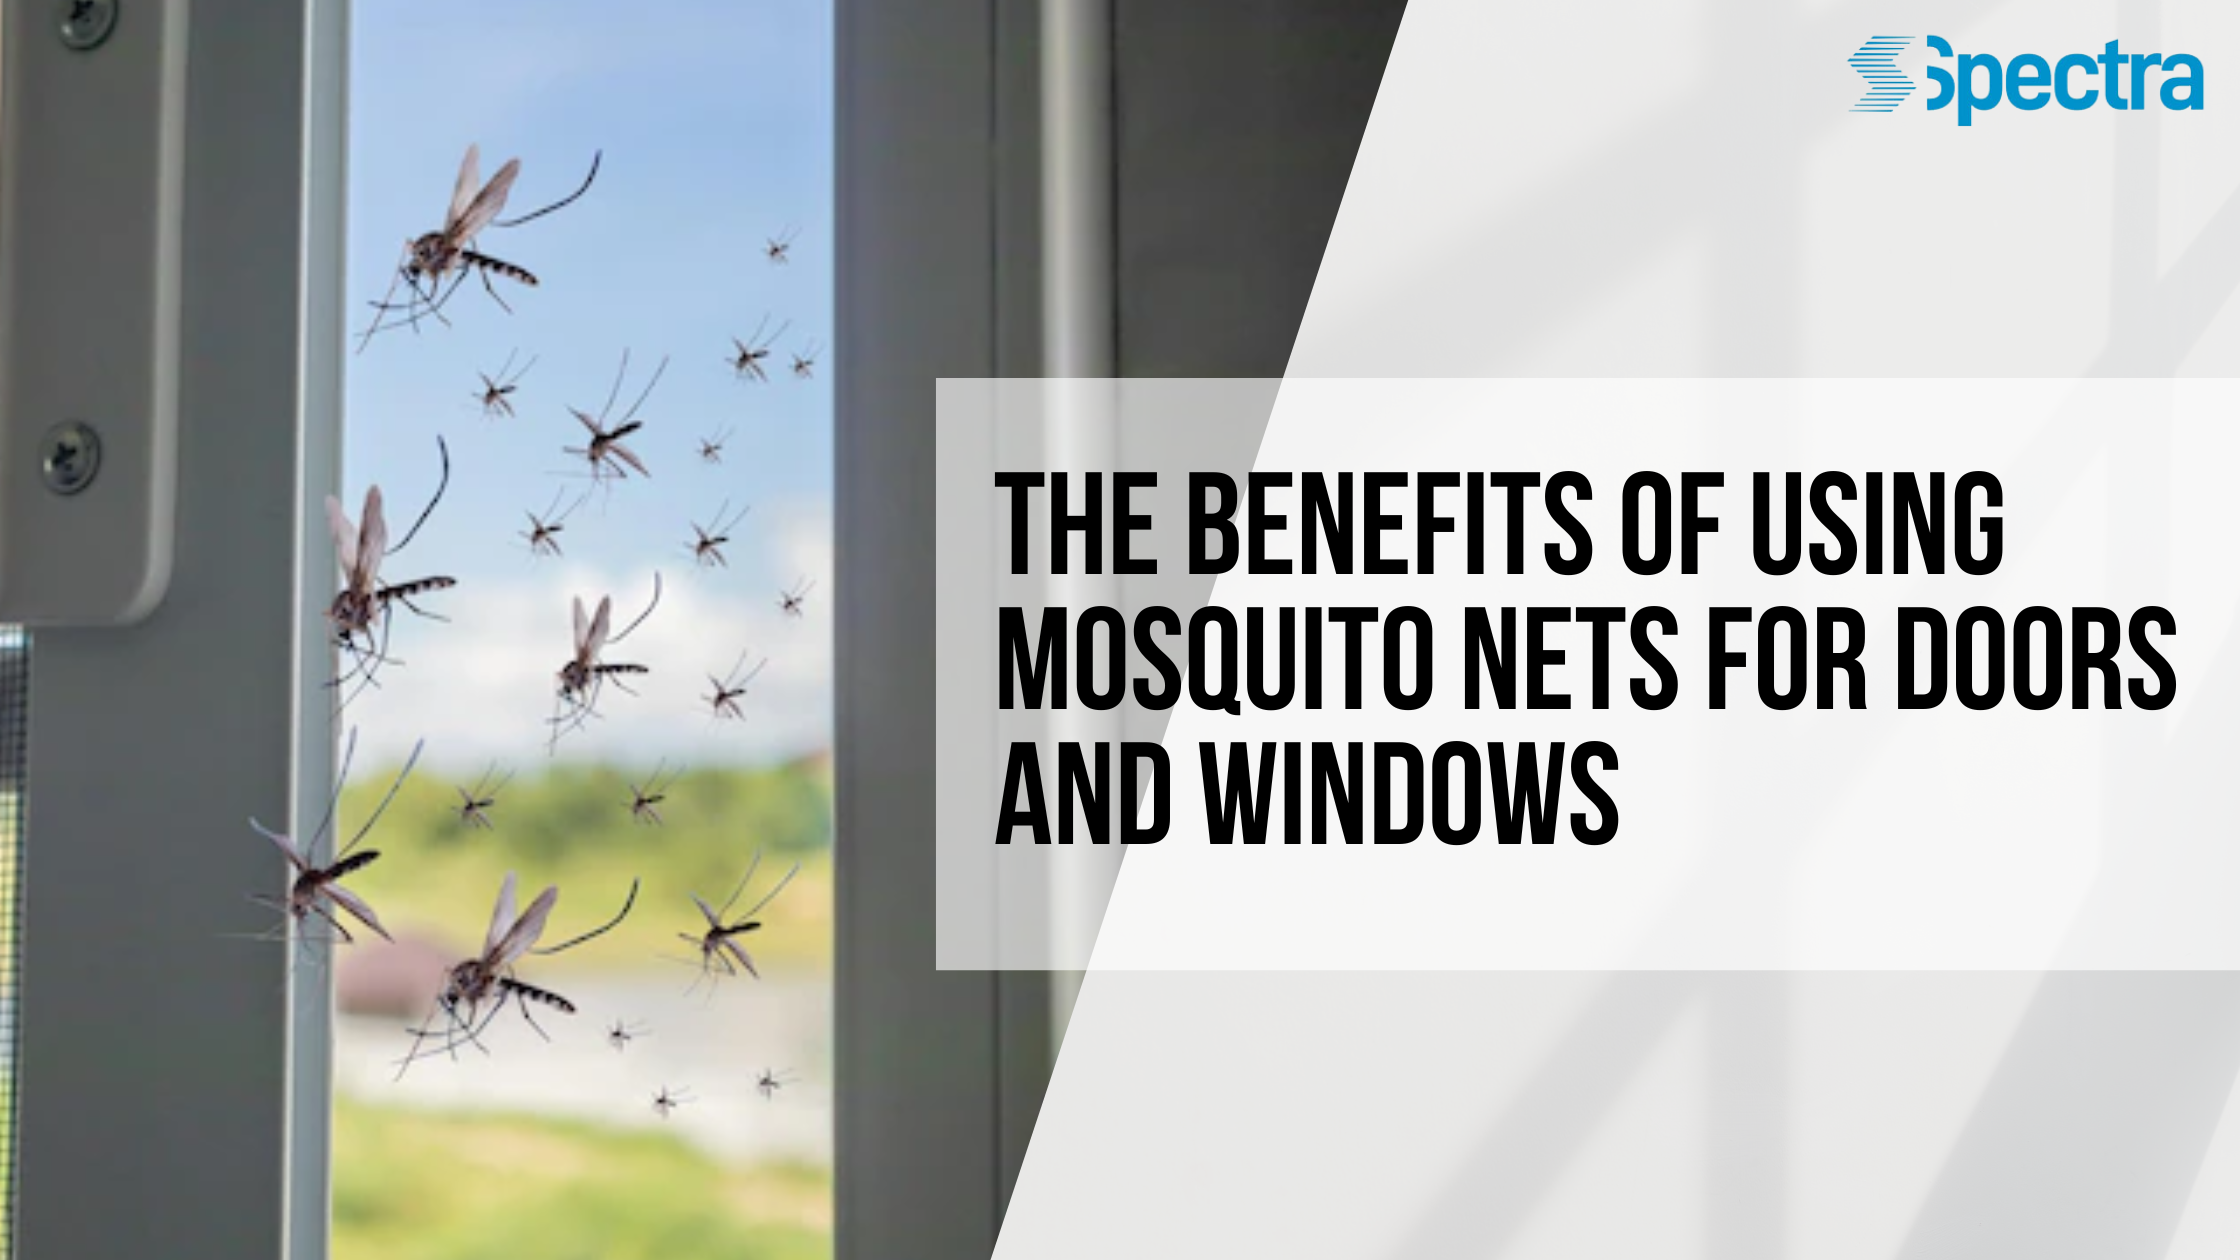 https://www.spectrablinds.com/wp-content/uploads/2023/01/The-benefits-of-using-mosquito-nets-for-doors-and-windows.png